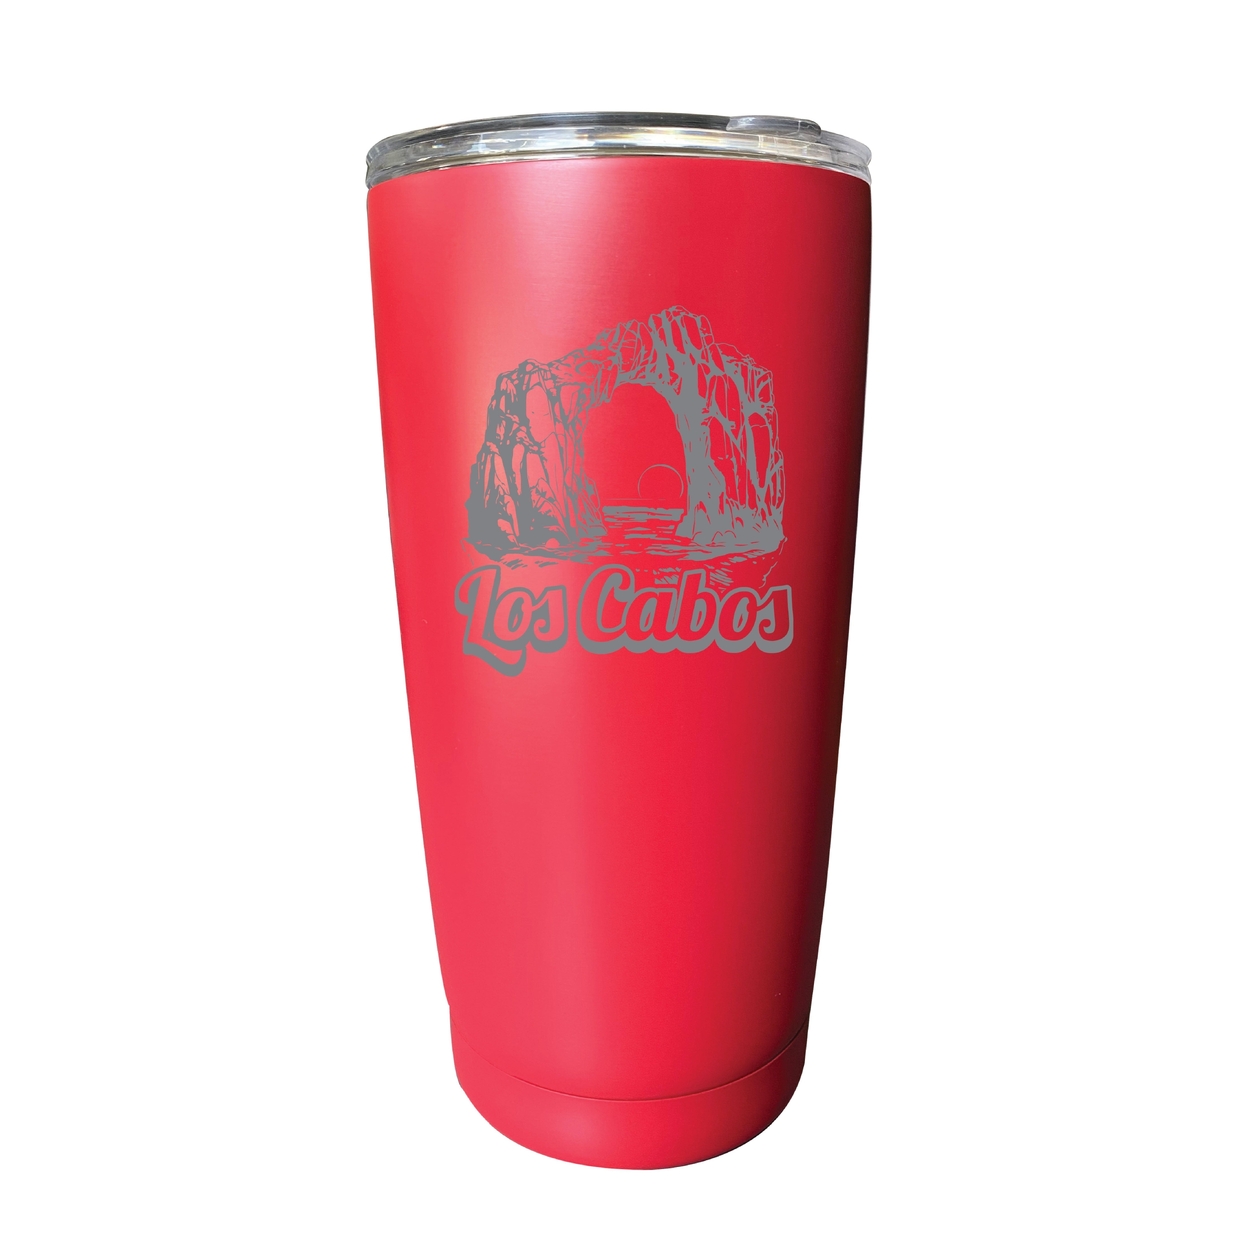 Los Cabos Mexico Souvenir 16 Oz Engraved Stainless Steel Insulated Tumbler - Pink,,2-Pack